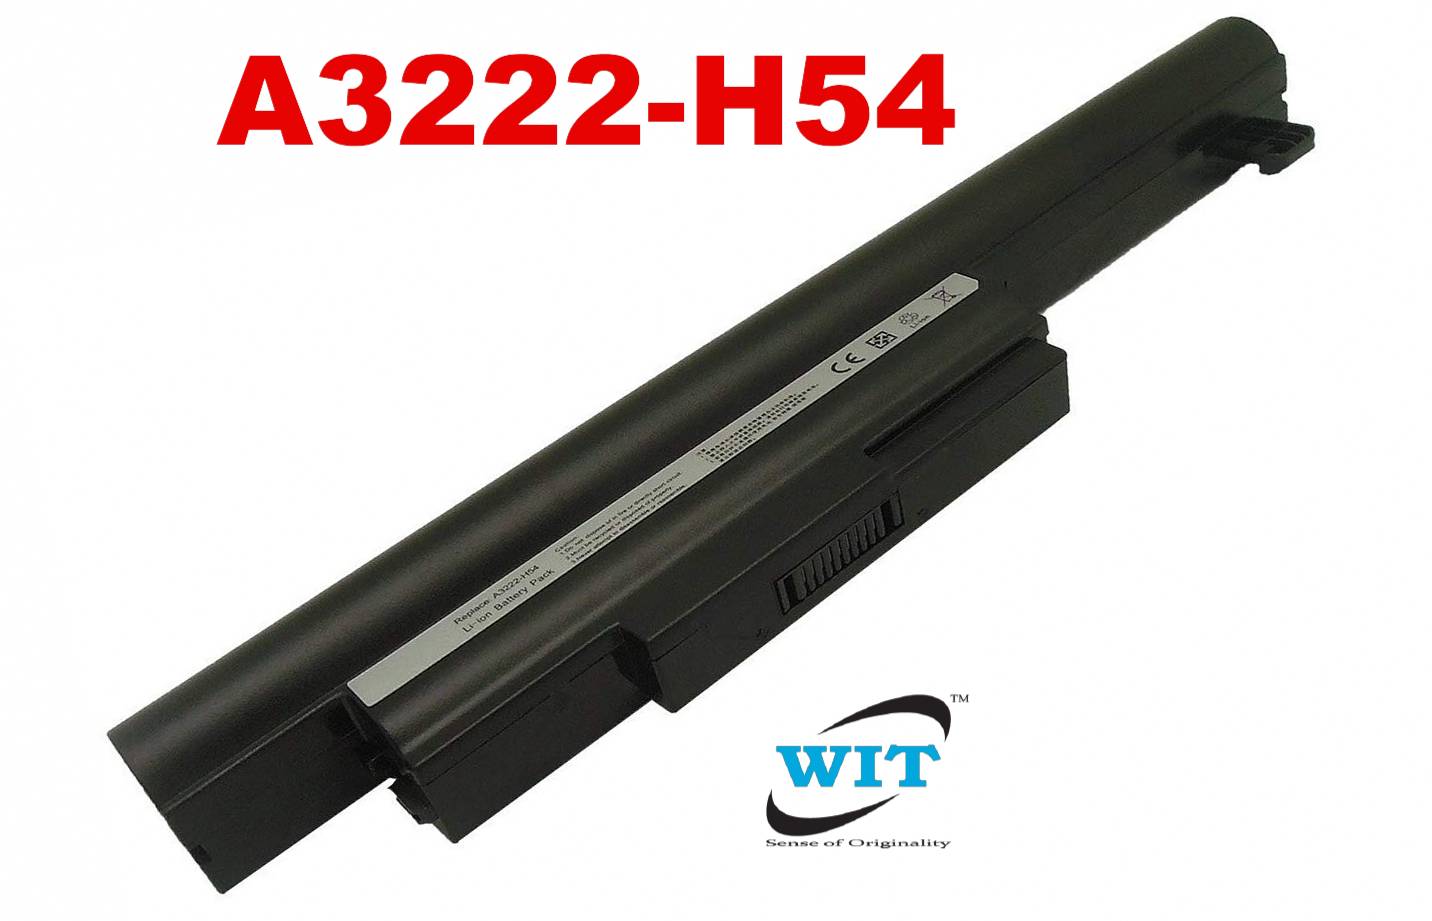 A3222-H54, A32-H54, BKHG1533 OEM Laptop battery for Hasee A460-T45 D2